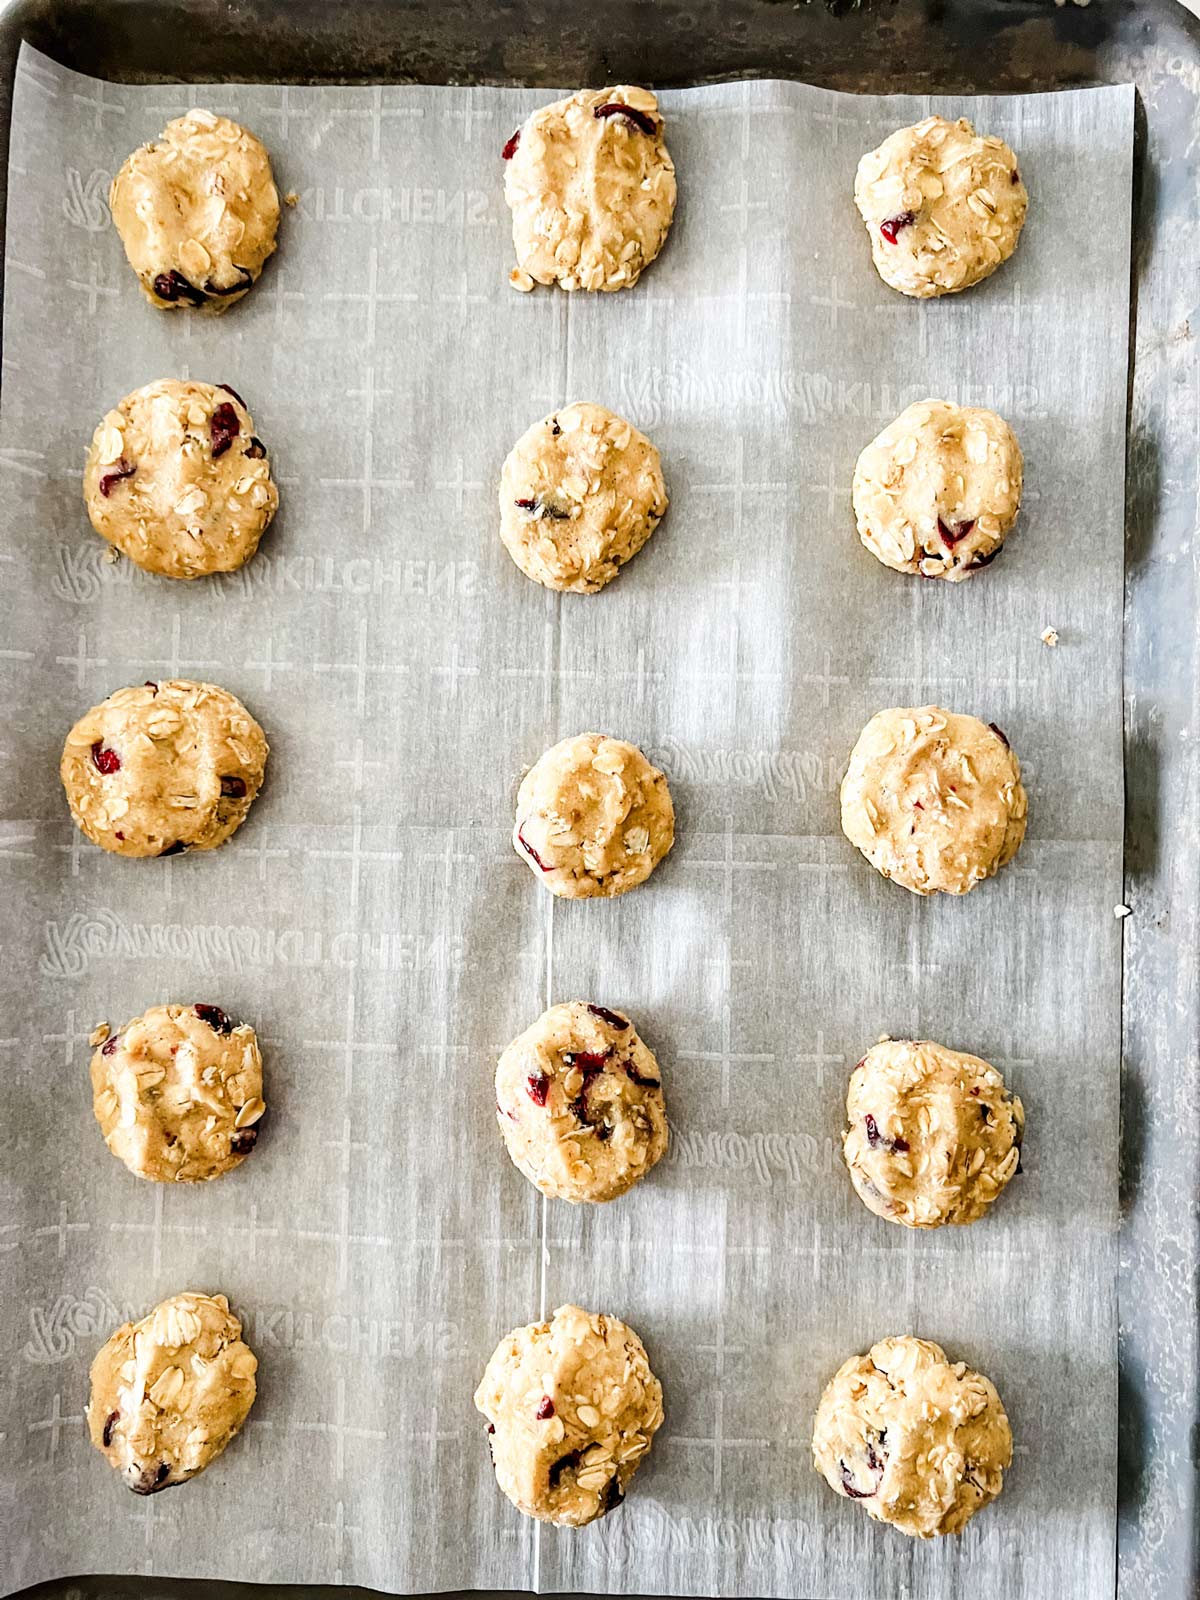 Oatmeal Craisin Cookies rolled and then pressed down on a parchment lined cookie sheet.